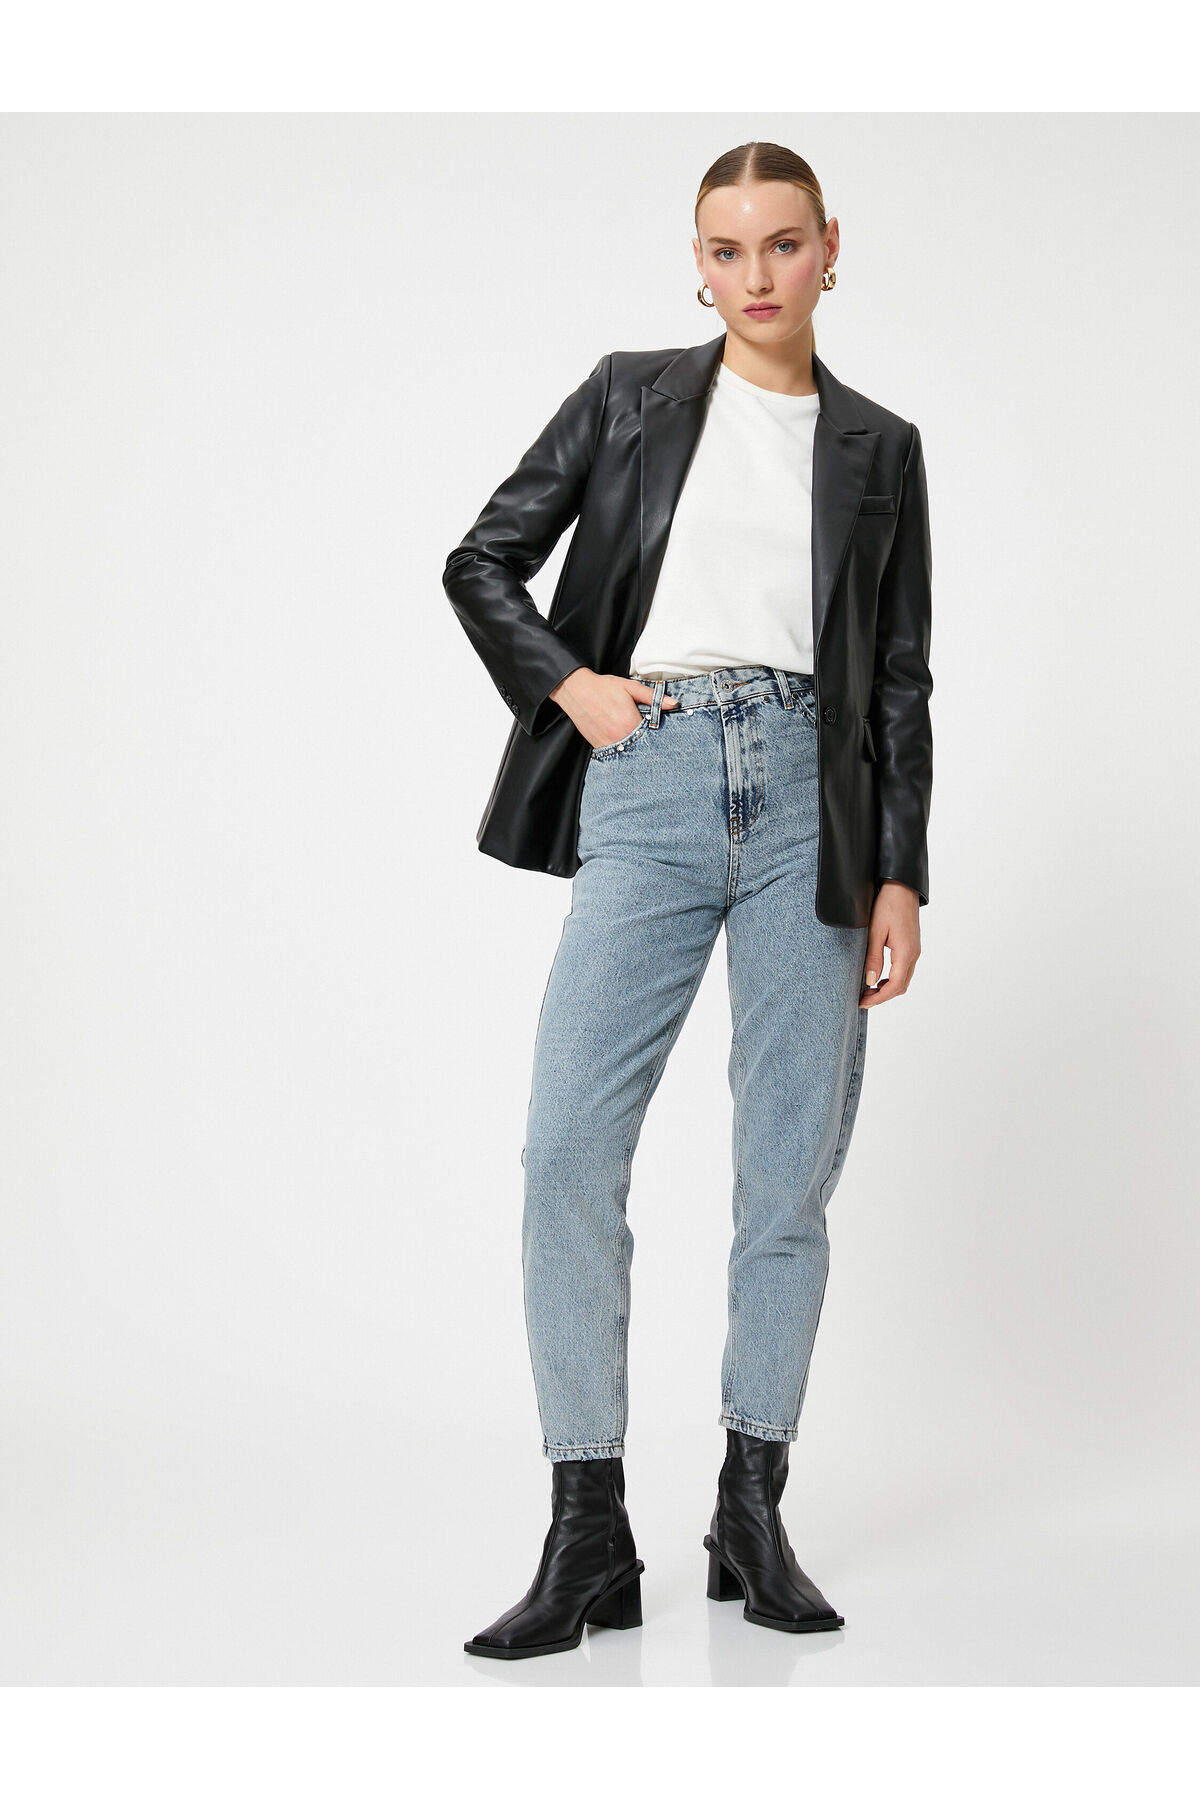 KOTON High Waist Straight Denim Crop Jeans Trousers - Lucy Jeans